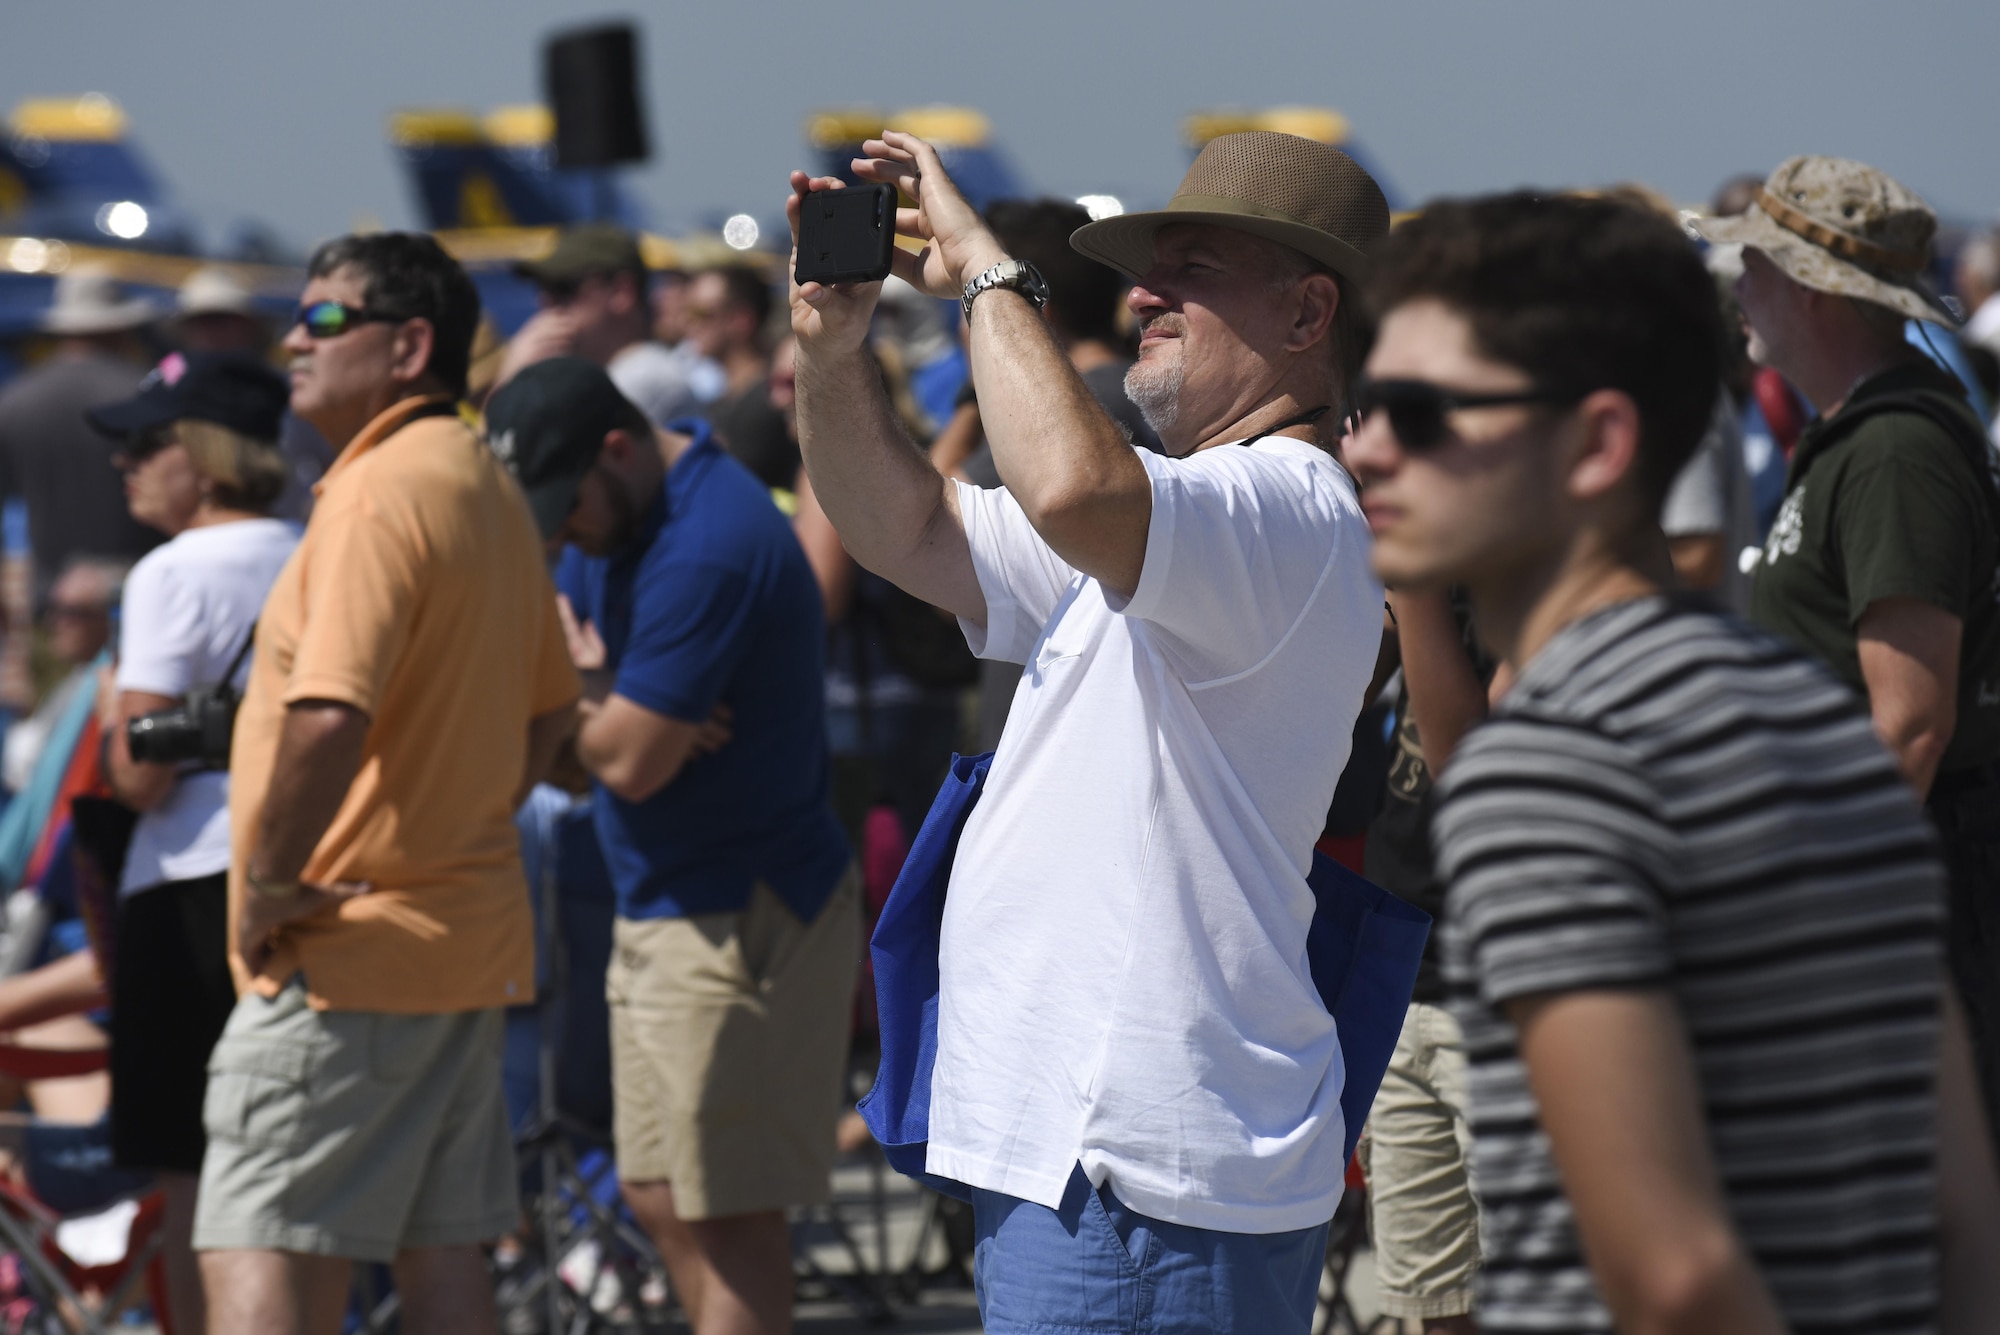 Attendees of the Wings Over Wayne Air Show watch aerial performances, May 20, 2017, at Seymour Johnson Air Force Base, North Carolina. Seymour Johnson AFB opened its gates to the public for a free, two-day event as a way to thank the local community for their ongoing support of the base’s mission. (U.S. Air Force photo by Staff Sgt. Brittain Crolley)